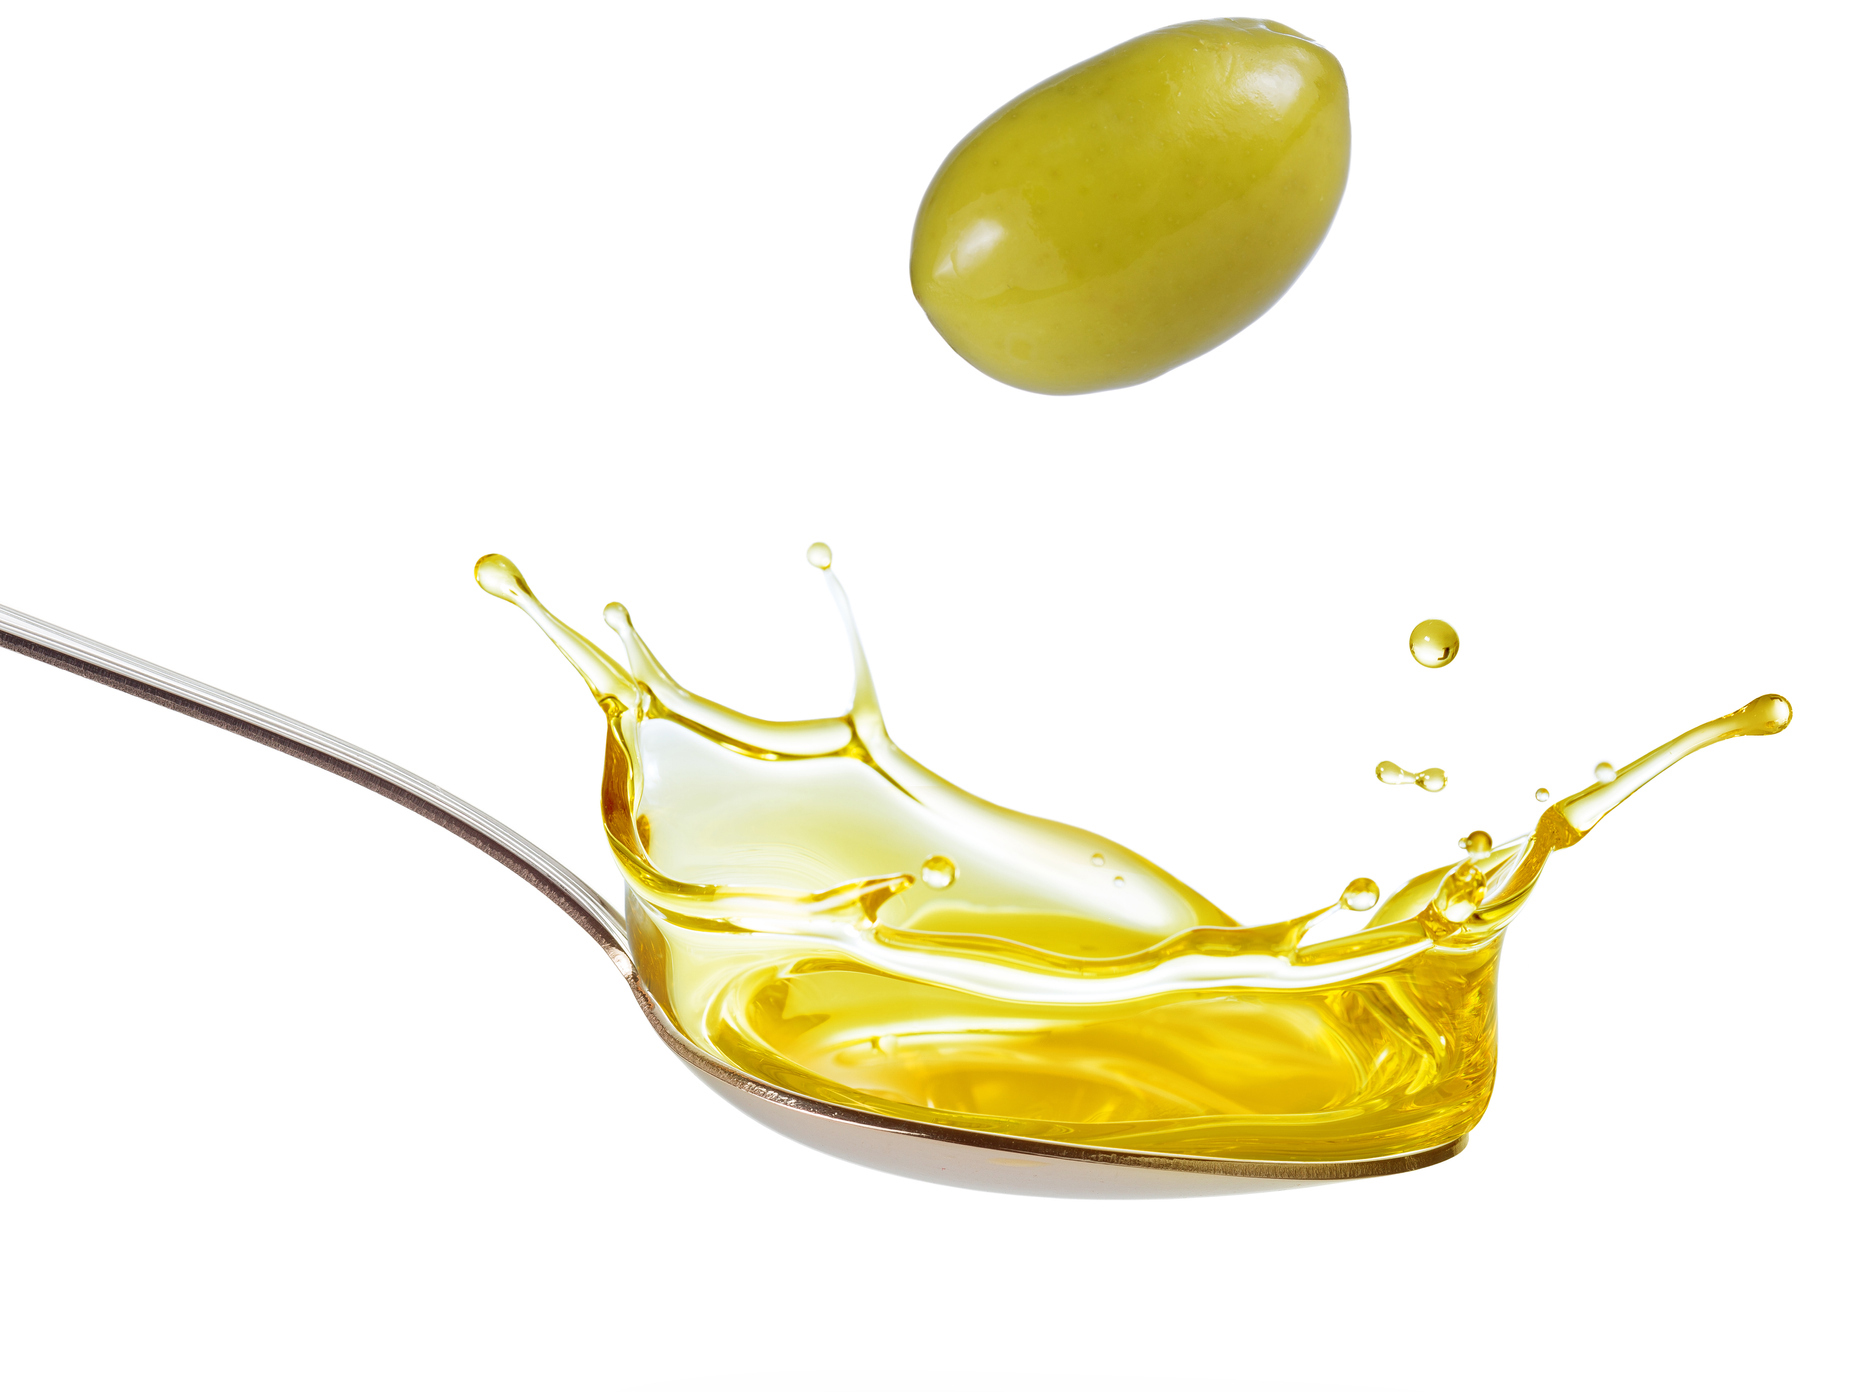 A lot more EVOO means a lot less dementia-causing brain protein